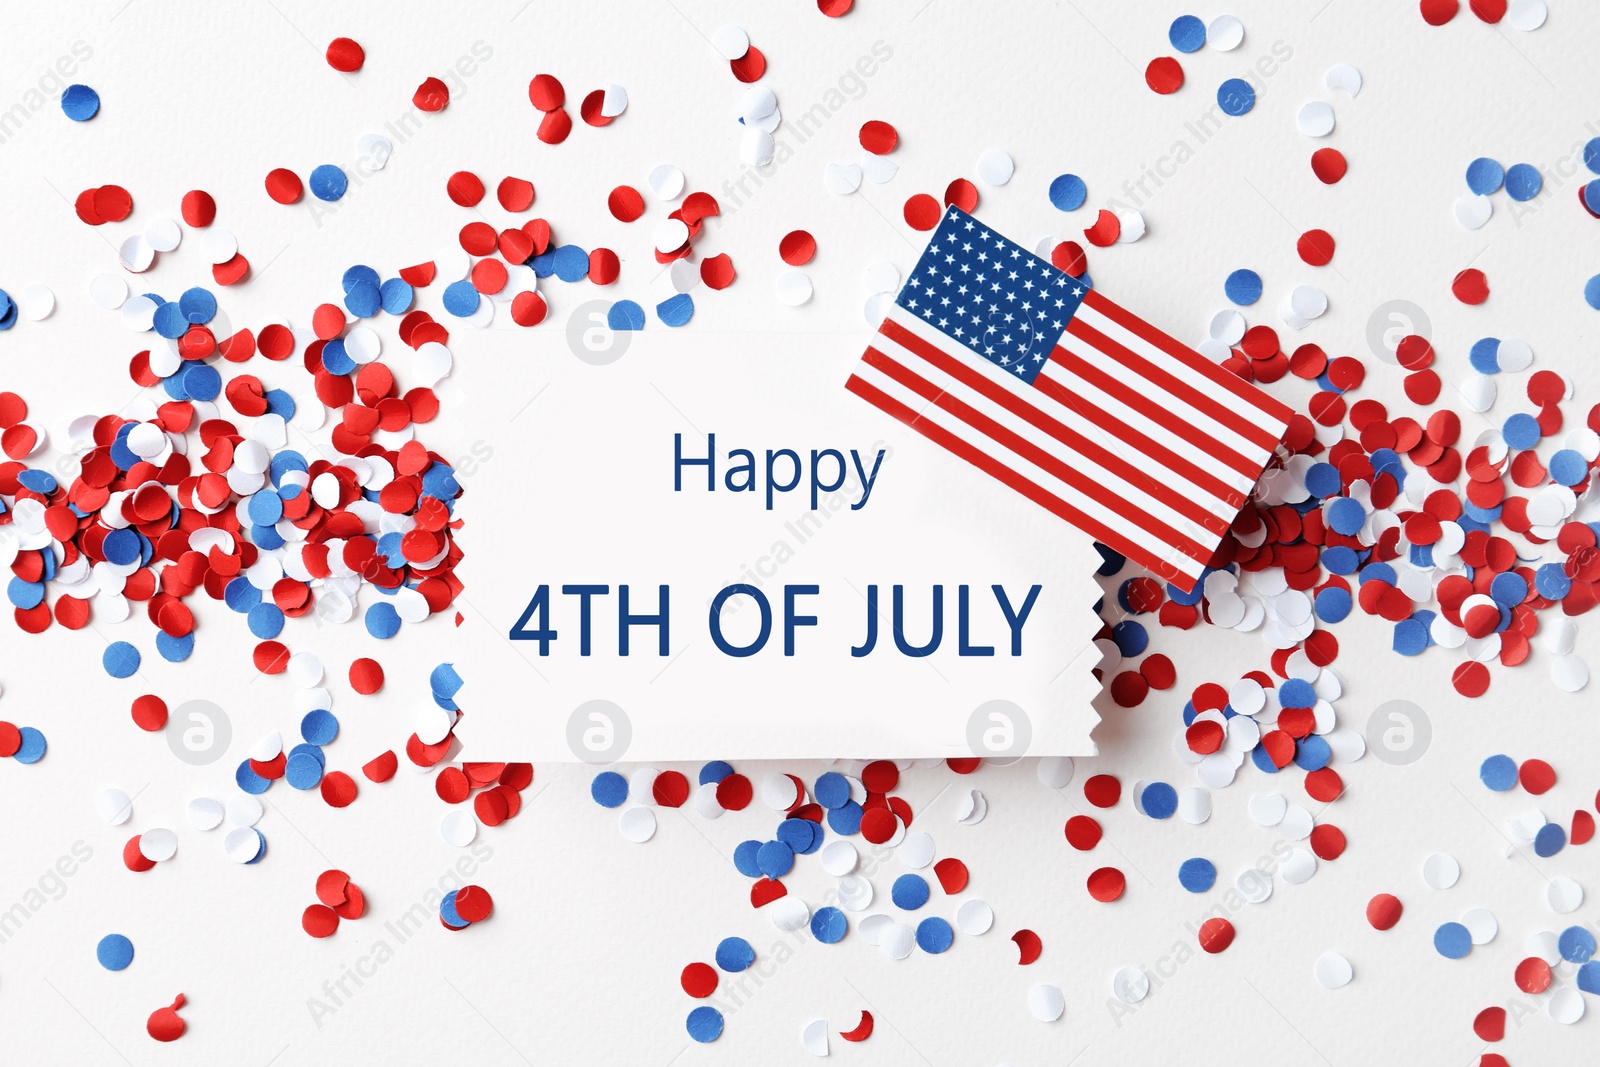 Photo of Flat lay composition with greeting card, USA flag and confetti on white background. Happy Independence Day